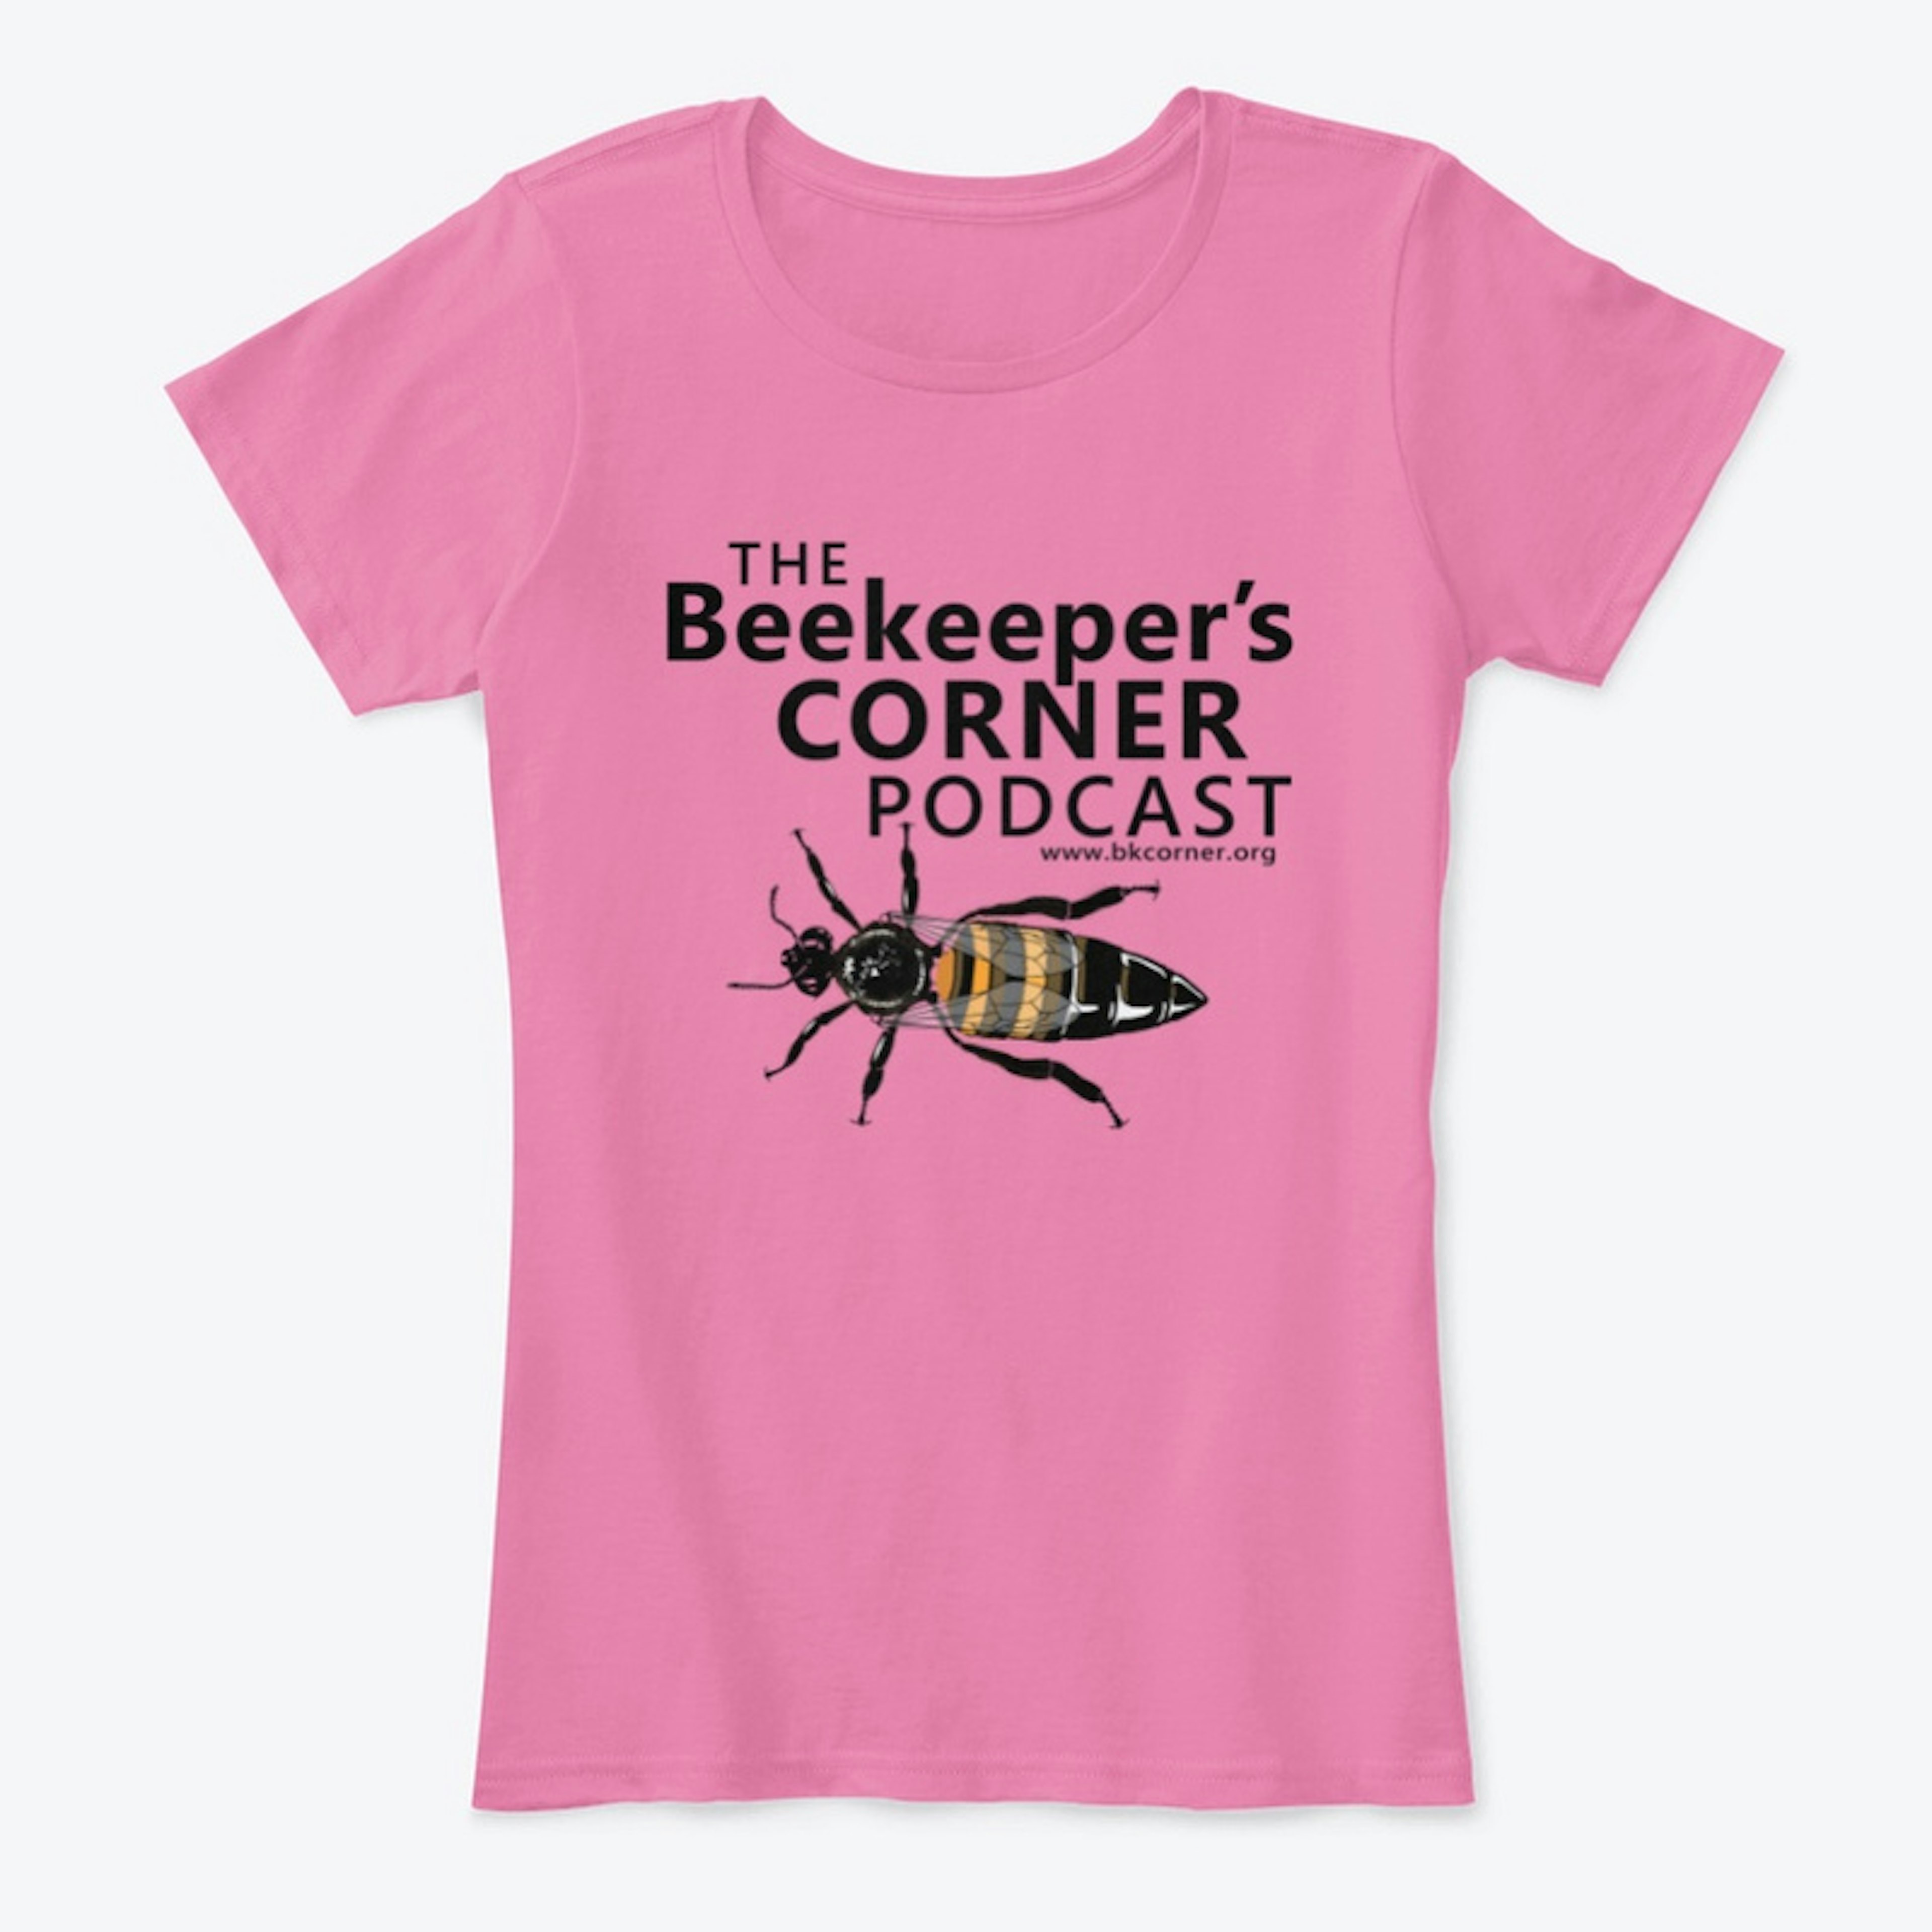 The Beekeepers Corner Podcast